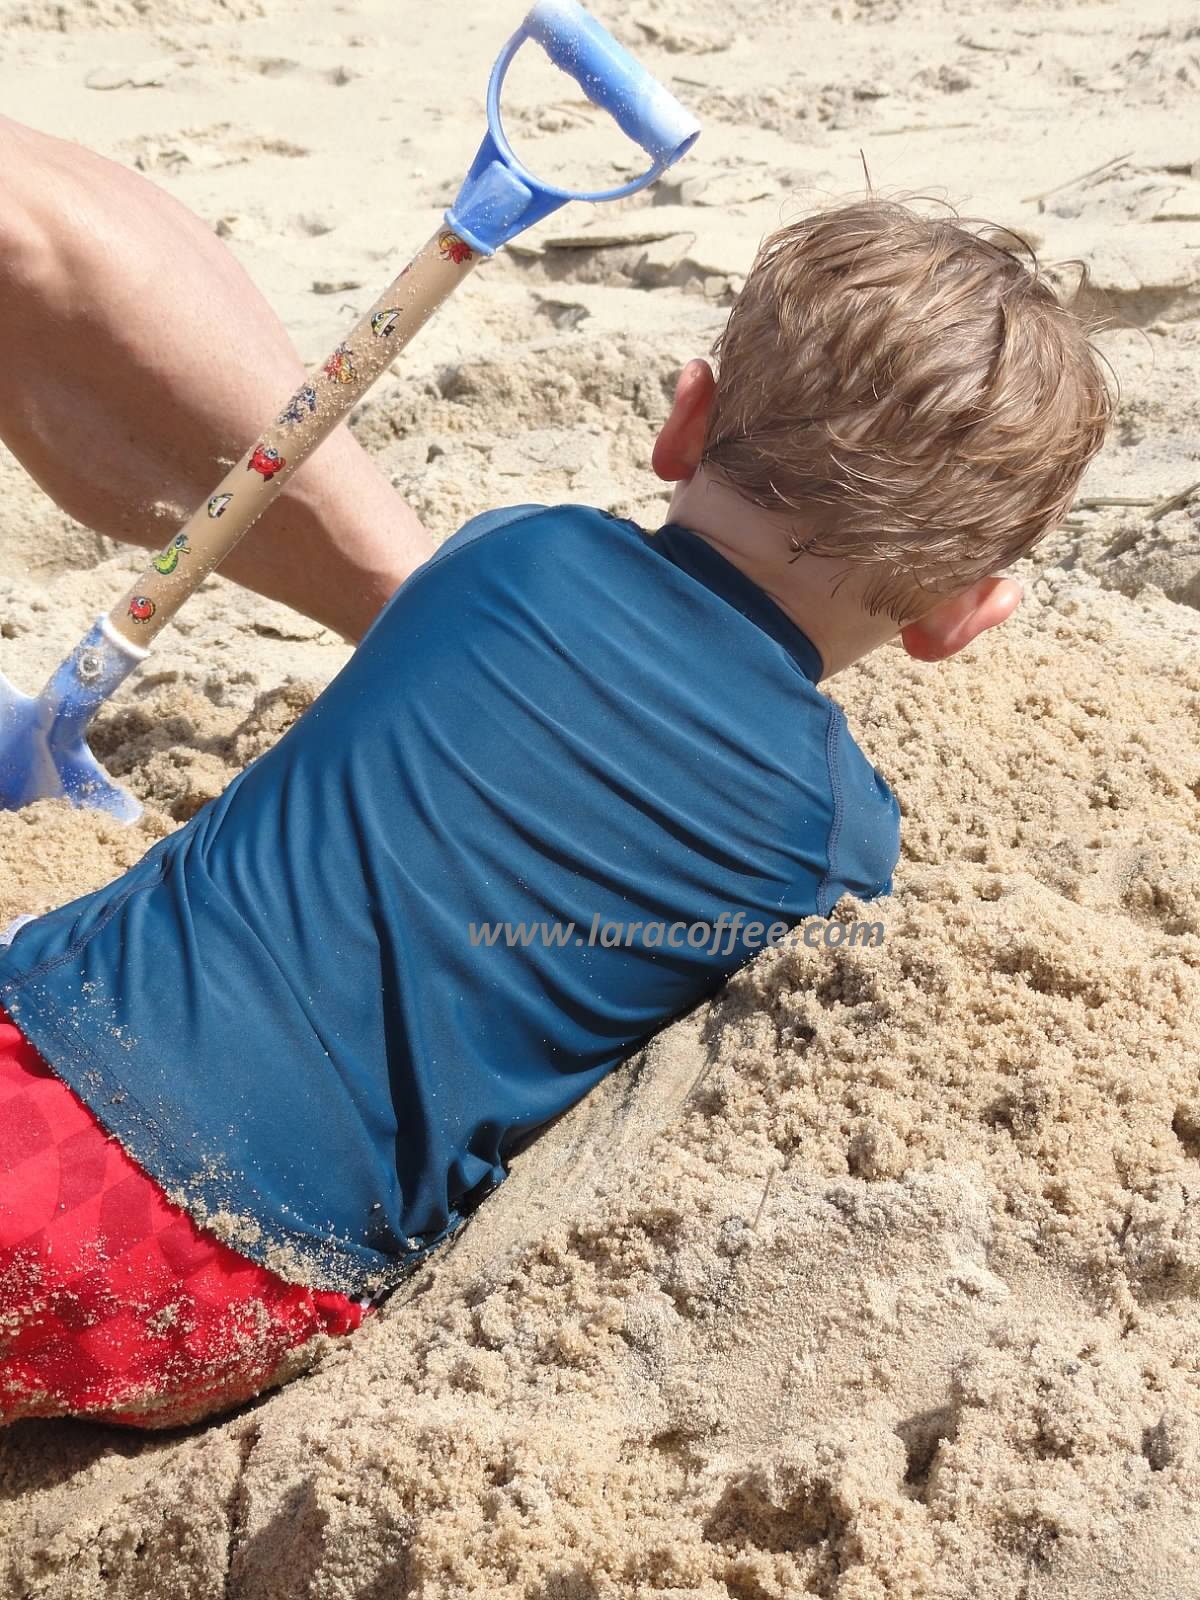 Preventing Toddler Sand Chafing Rash While at the Beach